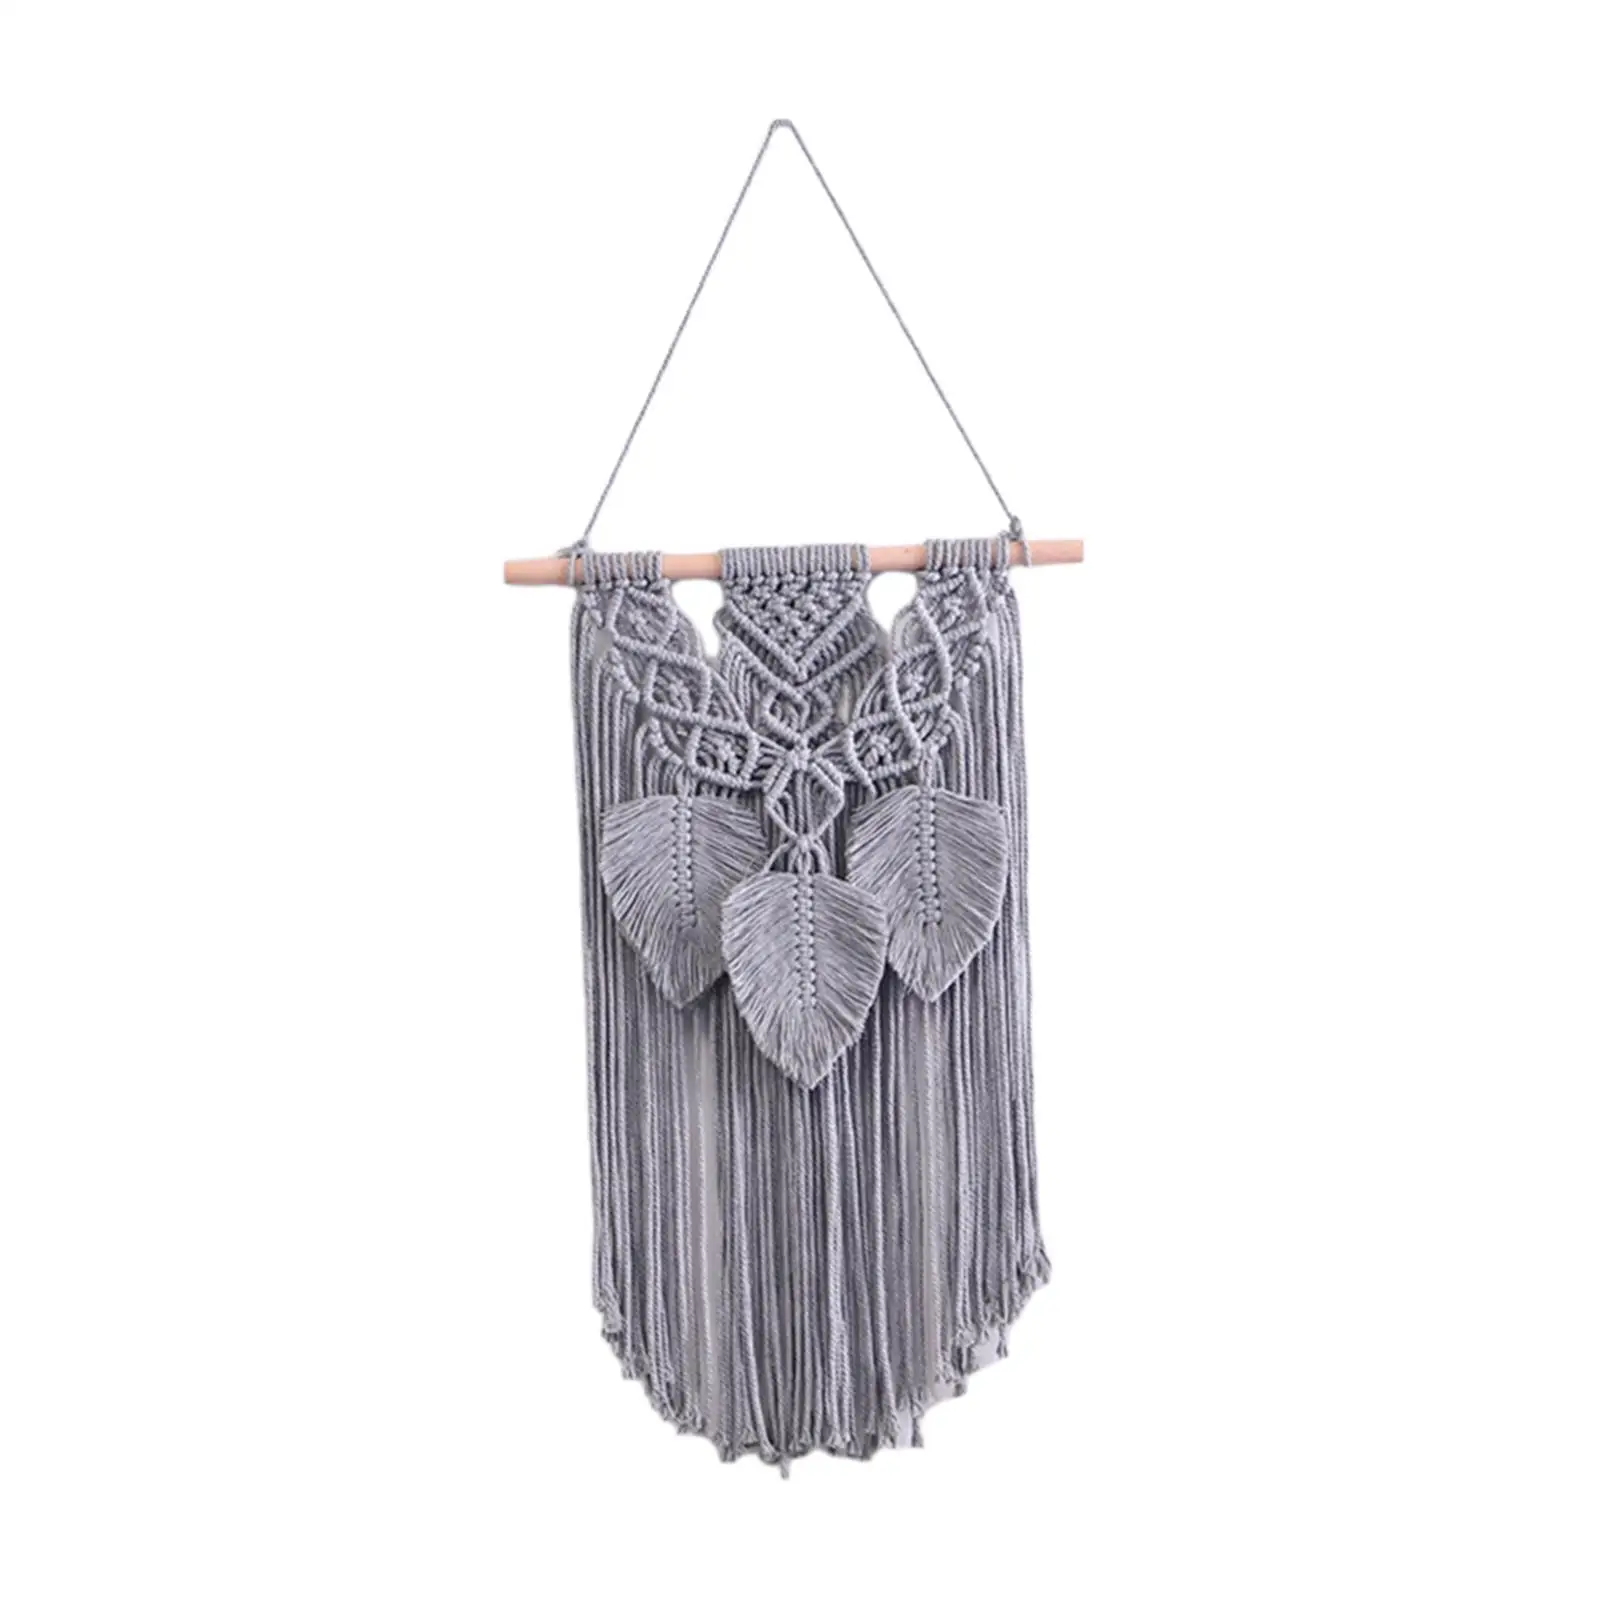 Leaves Tassels Macrame Wall Hanging Tapestry Minimalist Wall Art Decoration for Apartment Bedroom Home Backdrop Birthday Gift